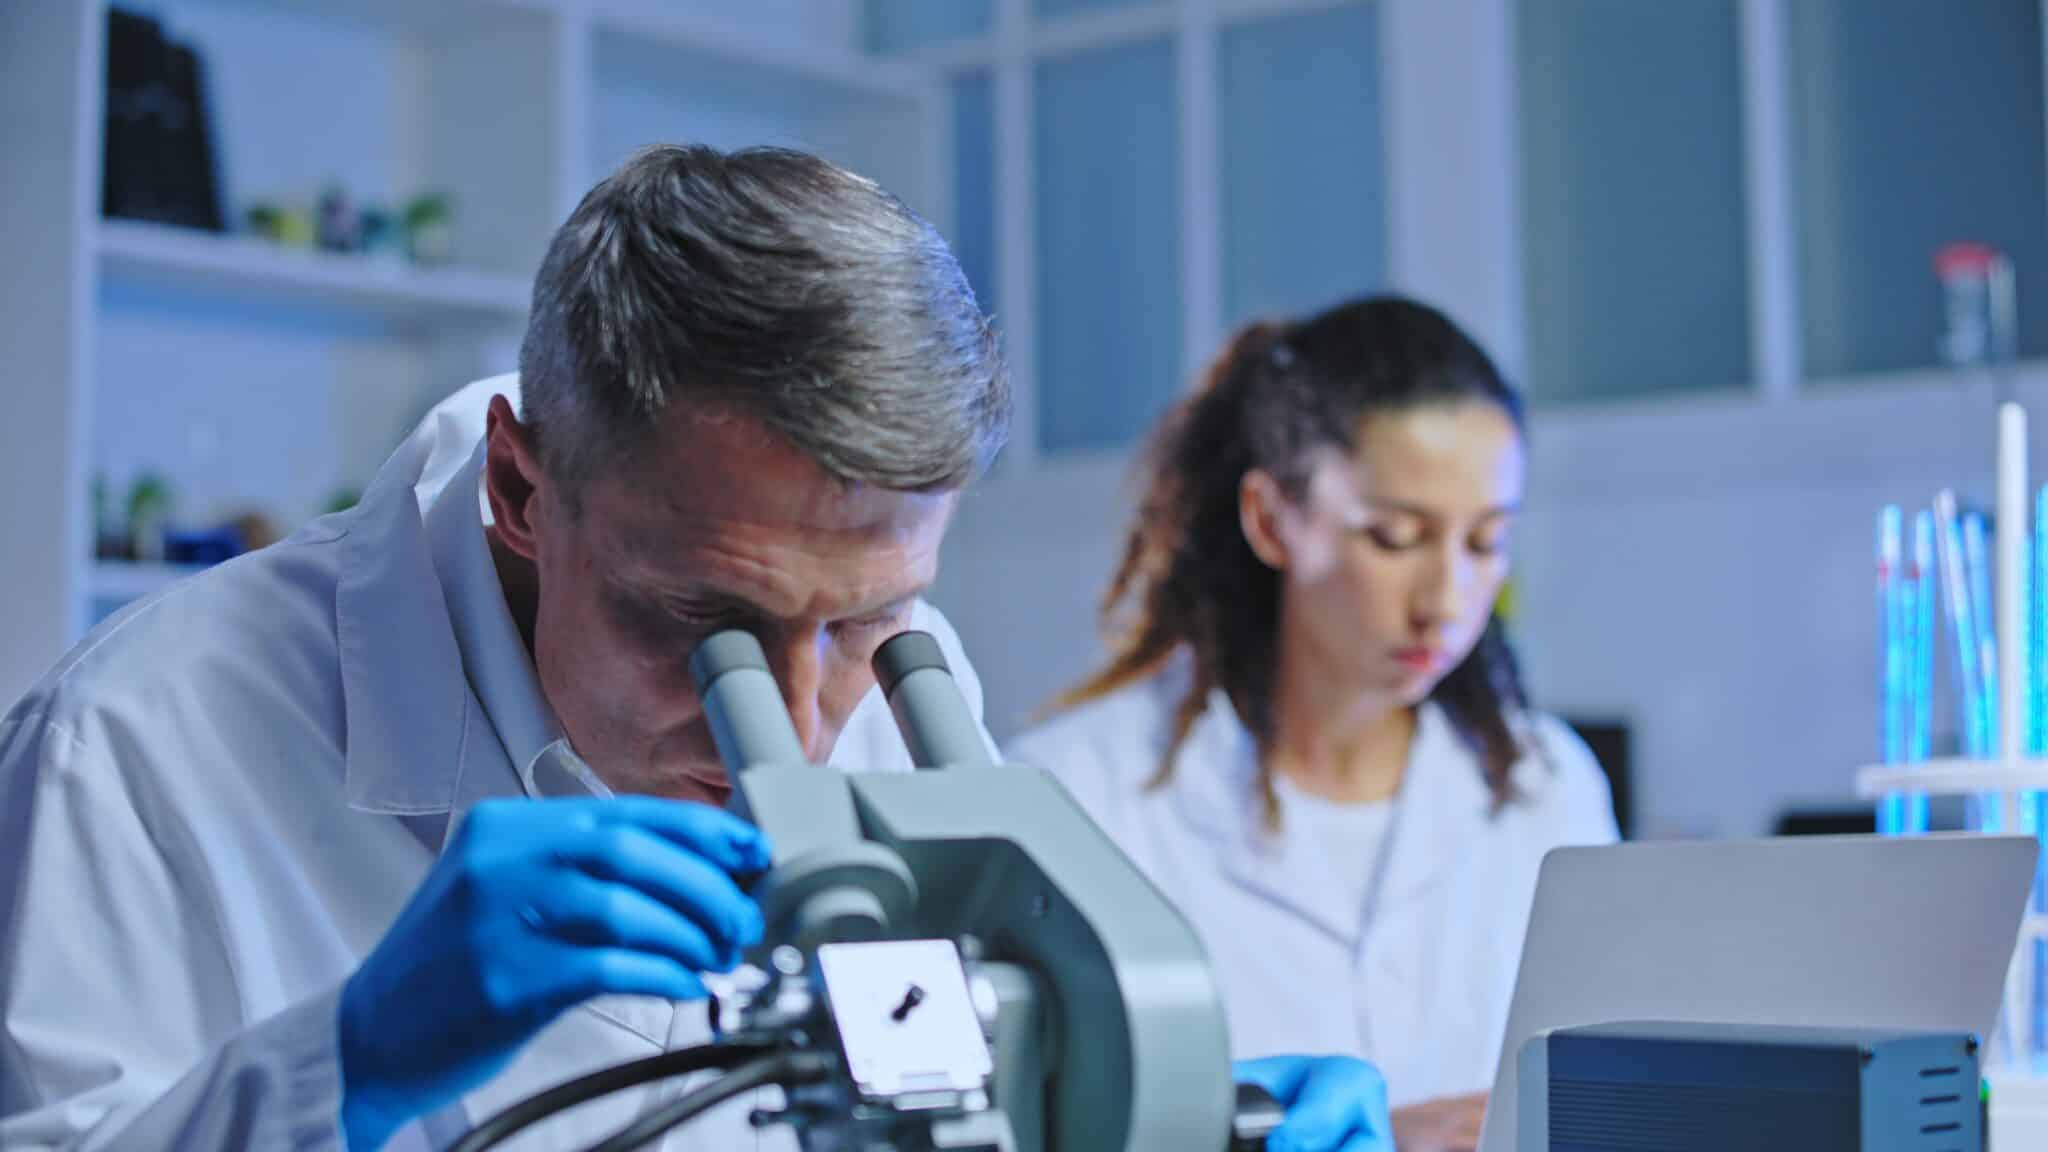 Oncology doctor examining tissue sample under microscope, clinic